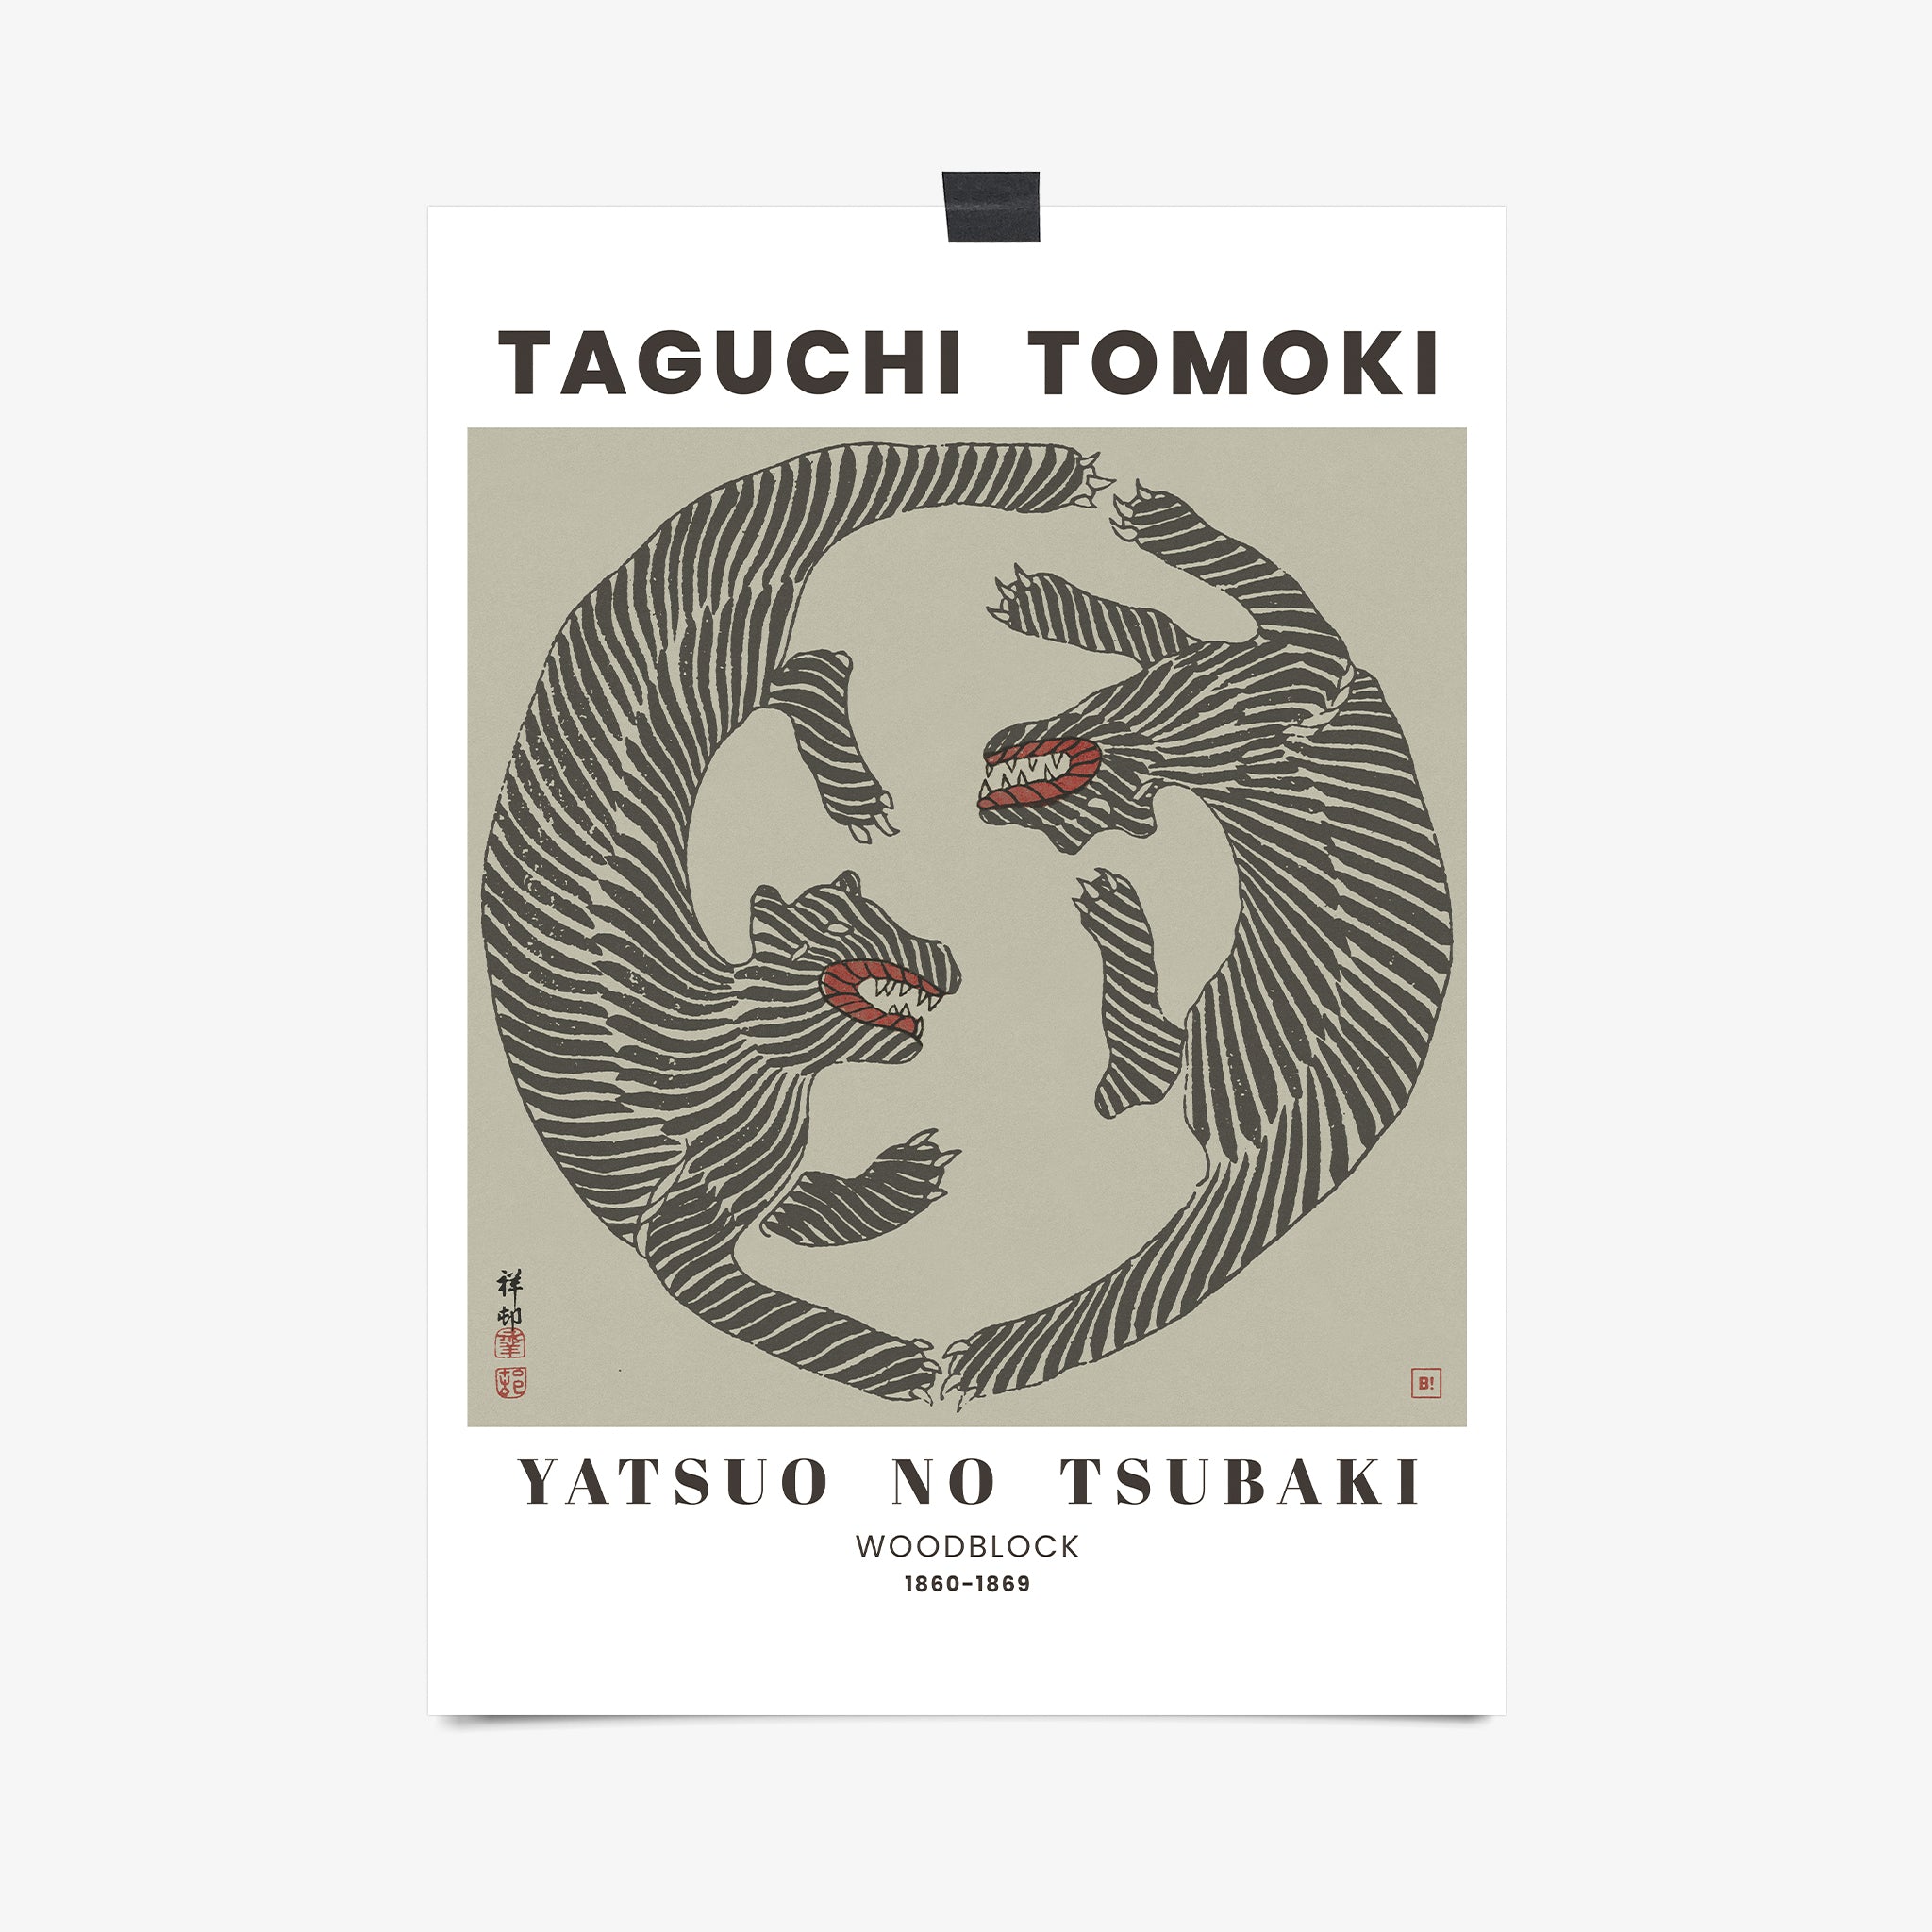 Be inspired by our remastered Taguchi Tomoki Woodblock Tigers Sage Green exhibition art print. This artwork was printed using the giclée process on archival acid-free paper that captures its timeless beauty in every detail.